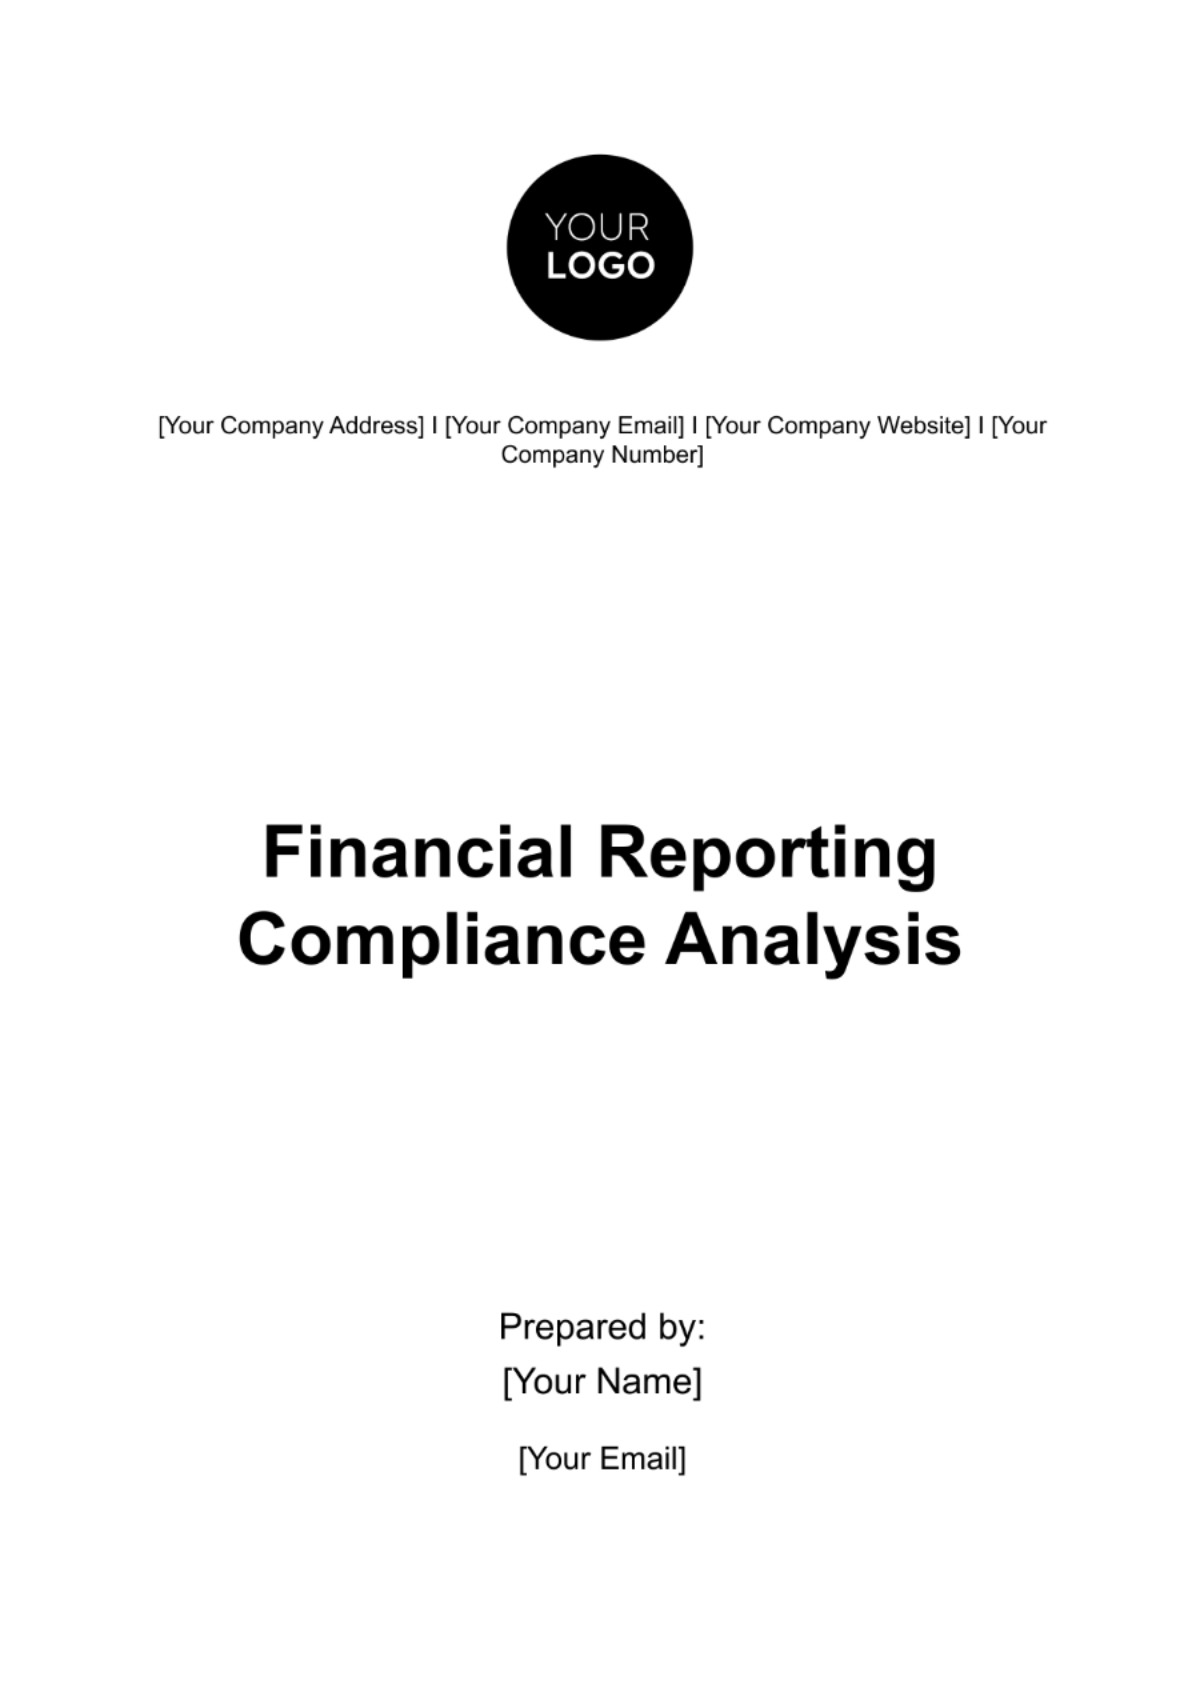 Financial Reporting Compliance Analysis Template